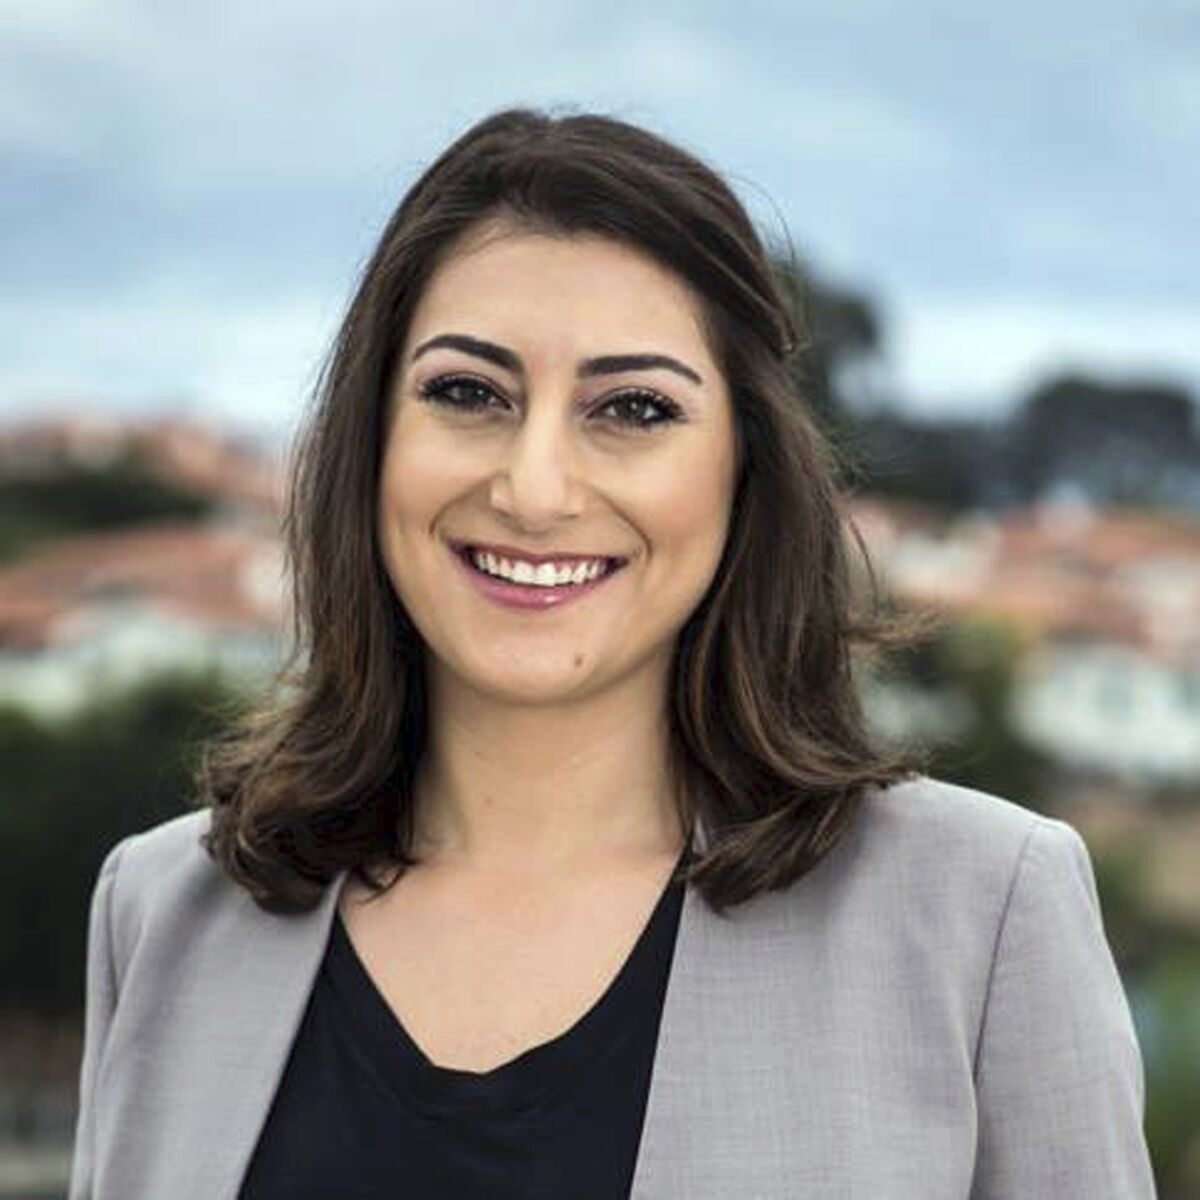 Sara Jacobs, 31, is California's youngest U.S. House representative.